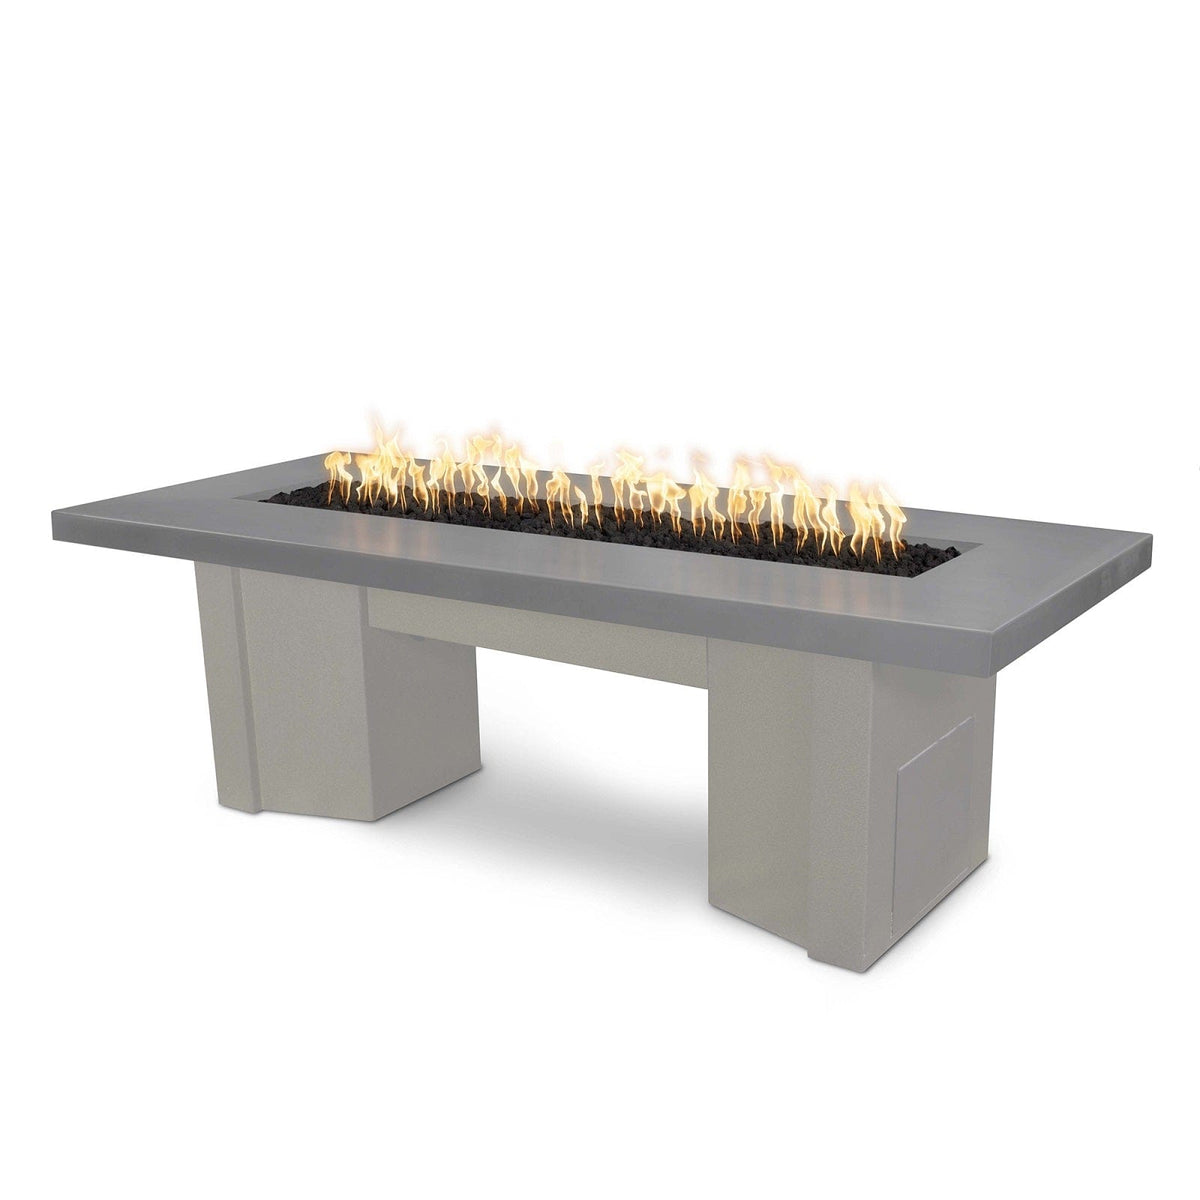 The Outdoor Plus Fire Features Natural Gray (-NGY) / Pewter Powder Coated Steel (-PEW) The Outdoor Plus 60&quot; Alameda Fire Table Smooth Concrete in Natural Gas - 110V Plug &amp; Play Electronic Ignition / OPT-ALMGFRC60EKIT-NG